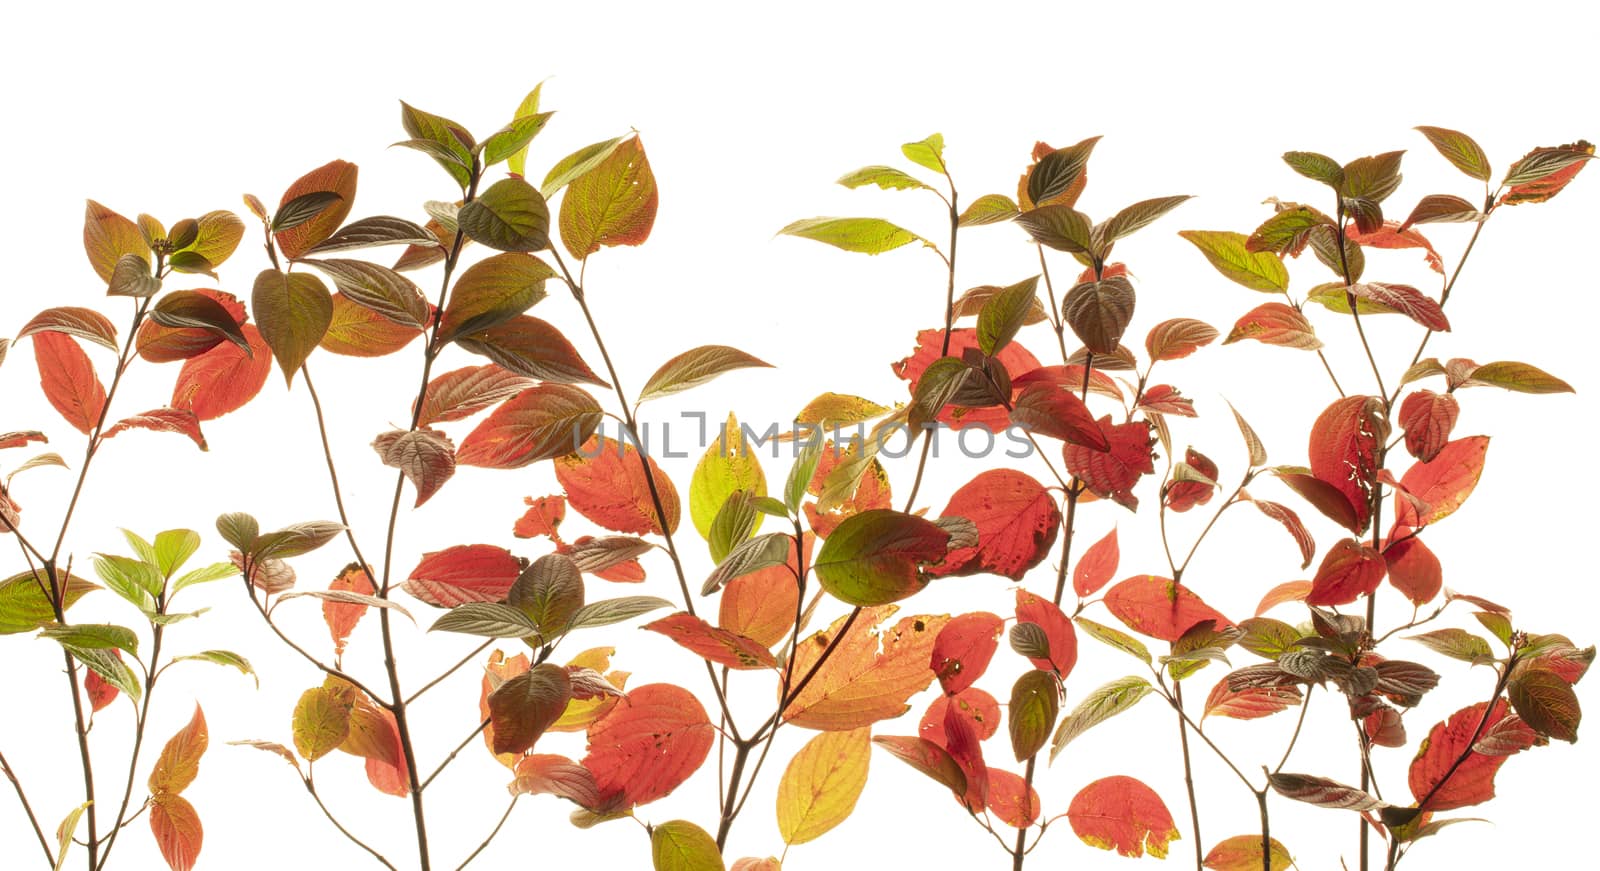 pink leaves of Euonymus shrub on branch in autumn isolated on white background.